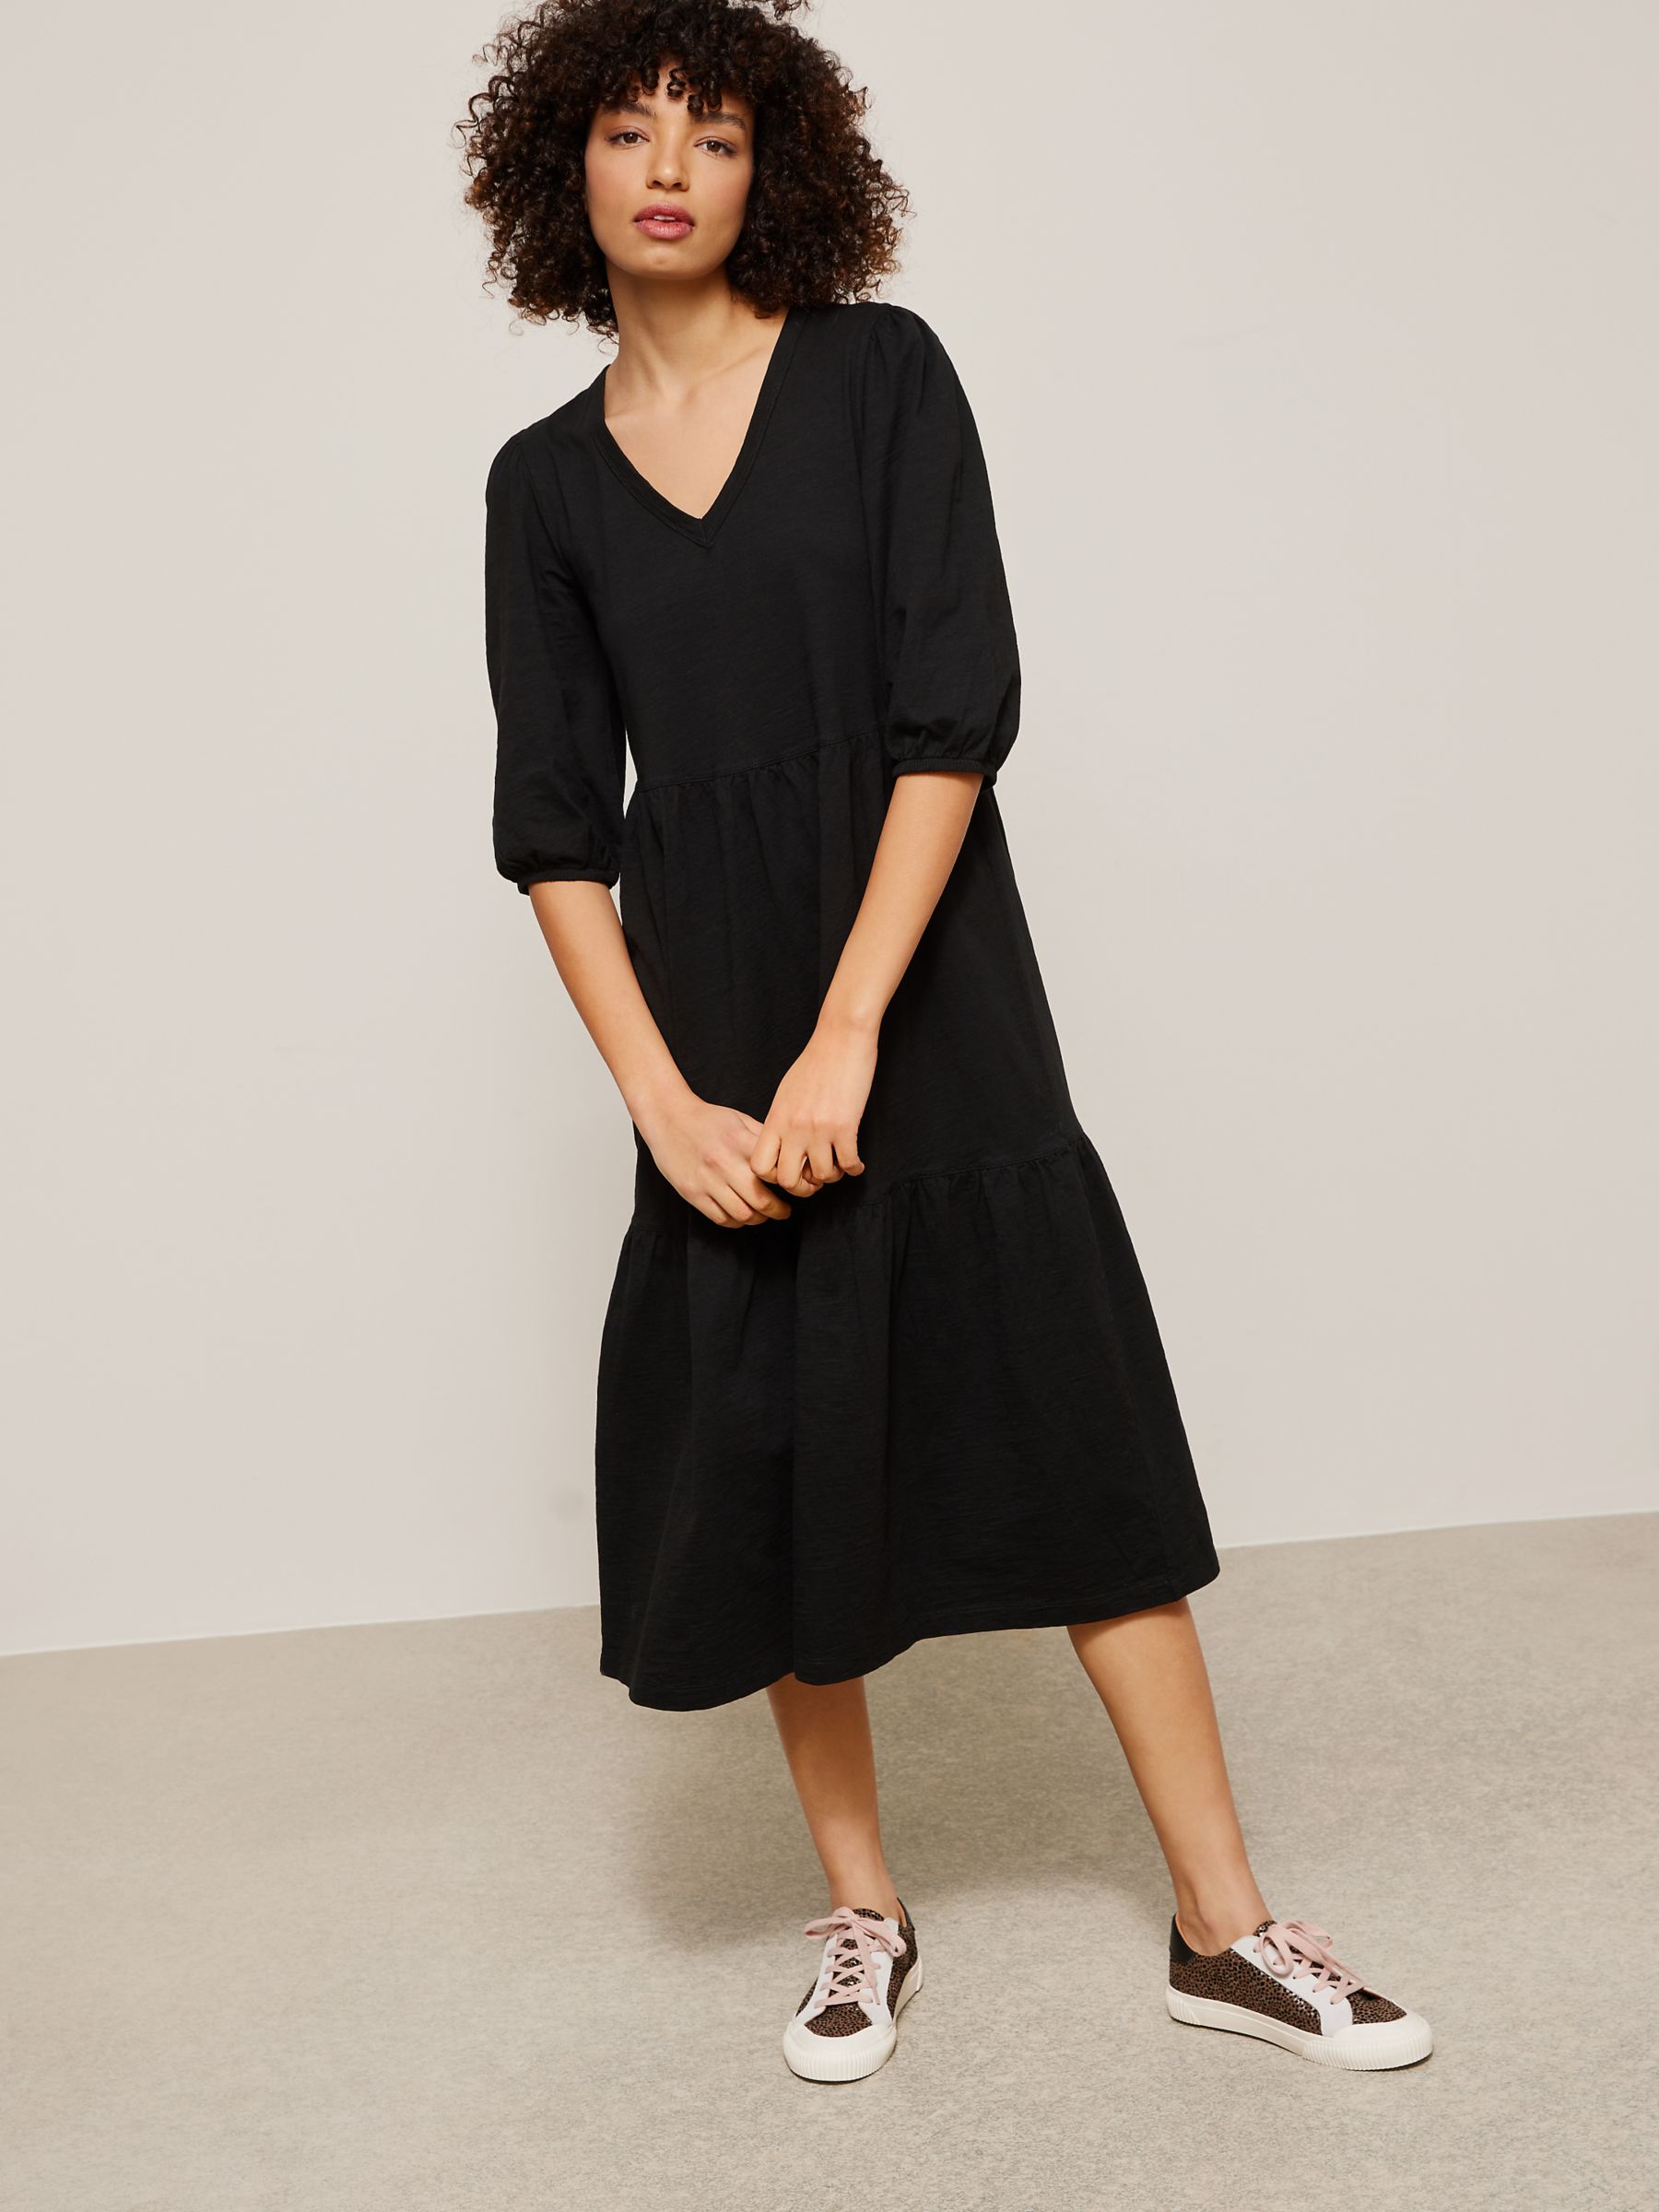 AND/OR Brielle Plain Tiered Jersey Dress, Black at John Lewis & Partners